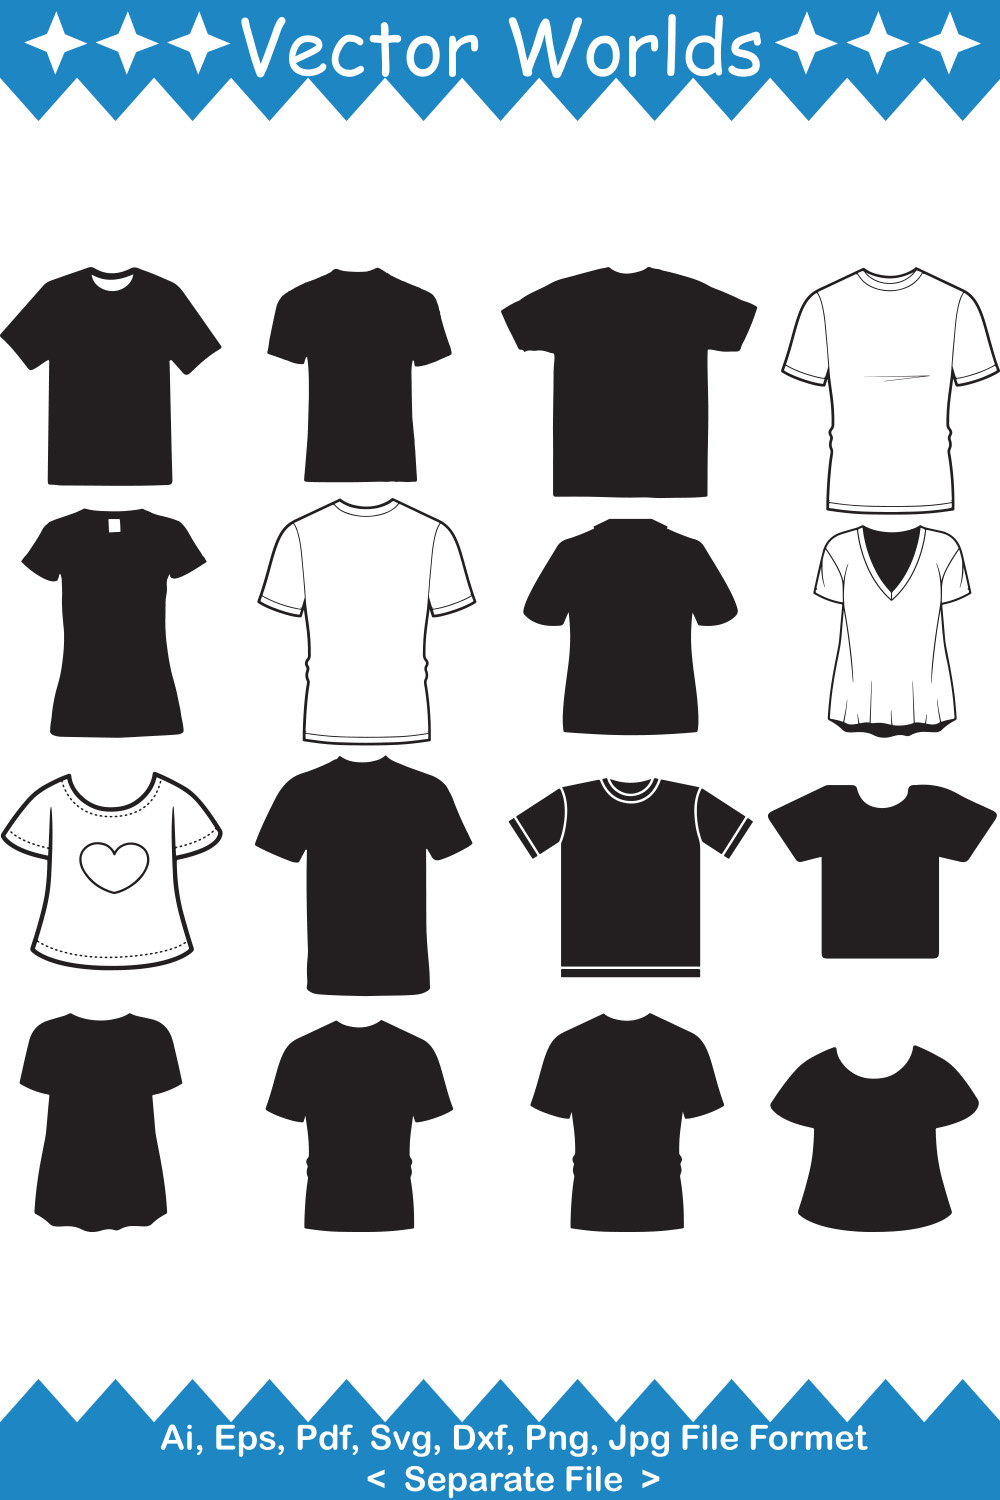 Collection of vector irresistible images of short sleeve t-shirt silhouettes.